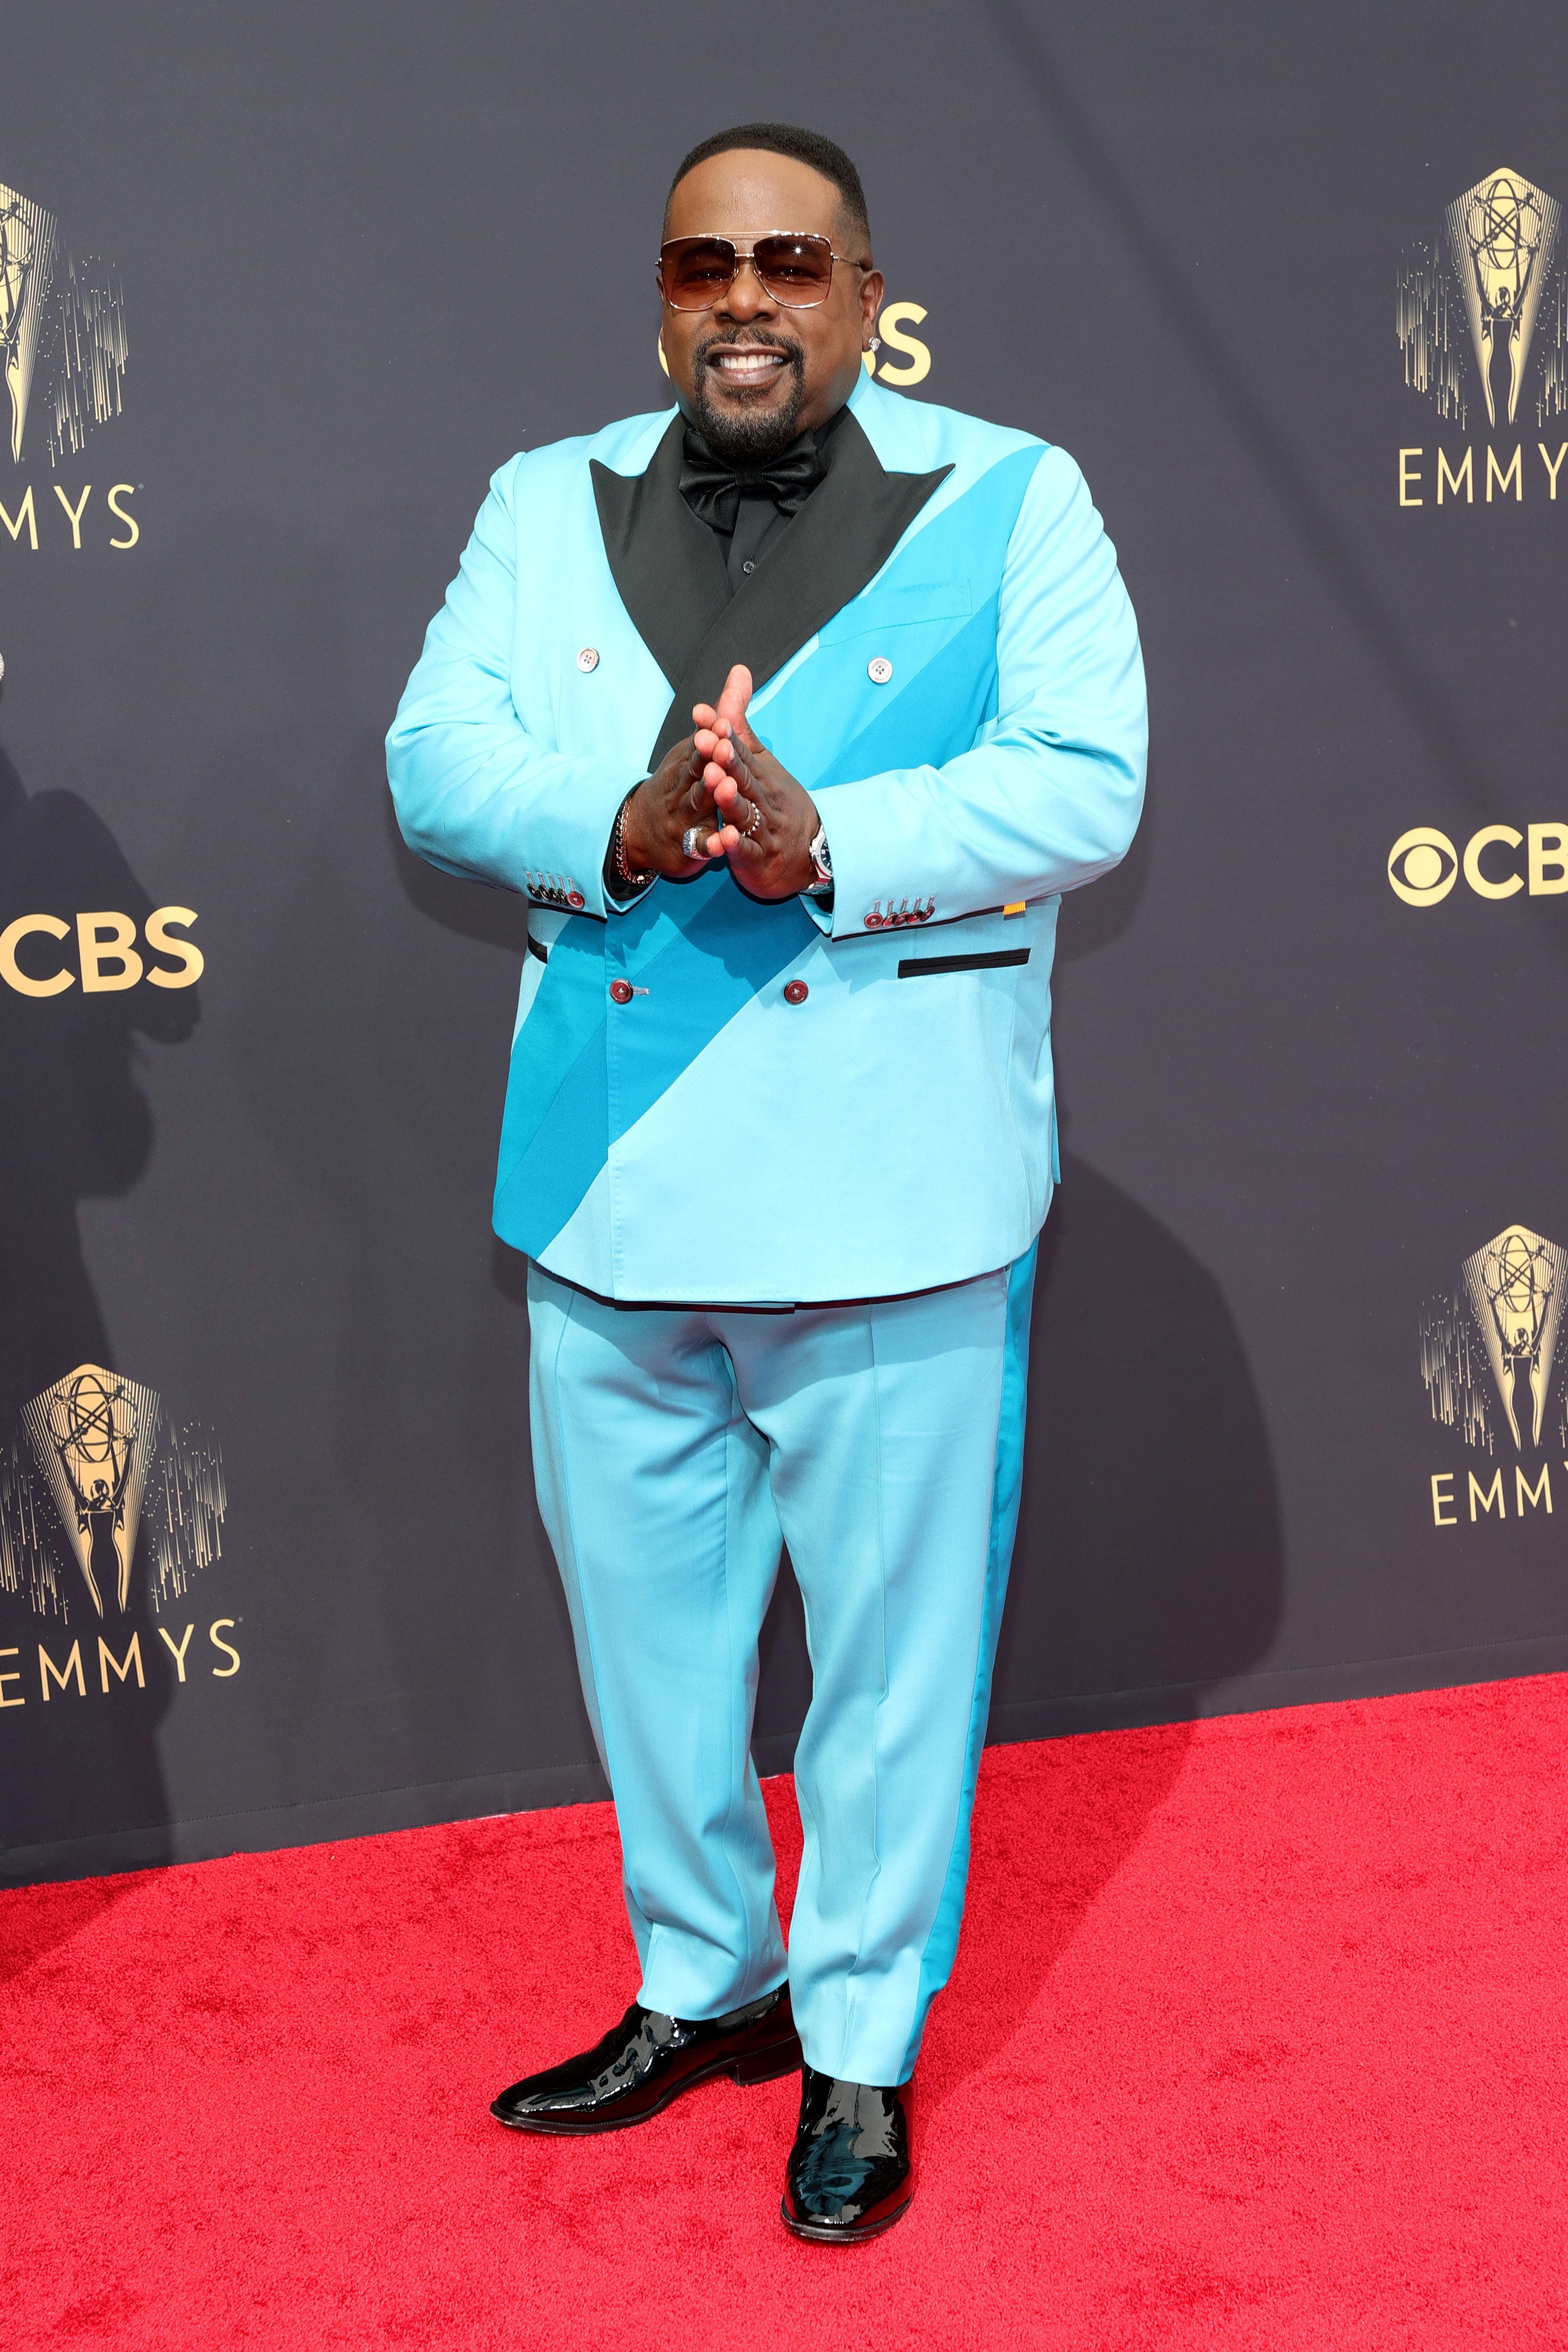 LOS ANGELES, CALIFORNIA - SEPTEMBER 19: Host Cedric the Entertainer attends the 73rd Primetime Emmy Awards at L.A. LIVE on September 19, 2021 in Los Angeles, California. (Photo by Rich Fury/Getty Images) (Foto: Getty Images)